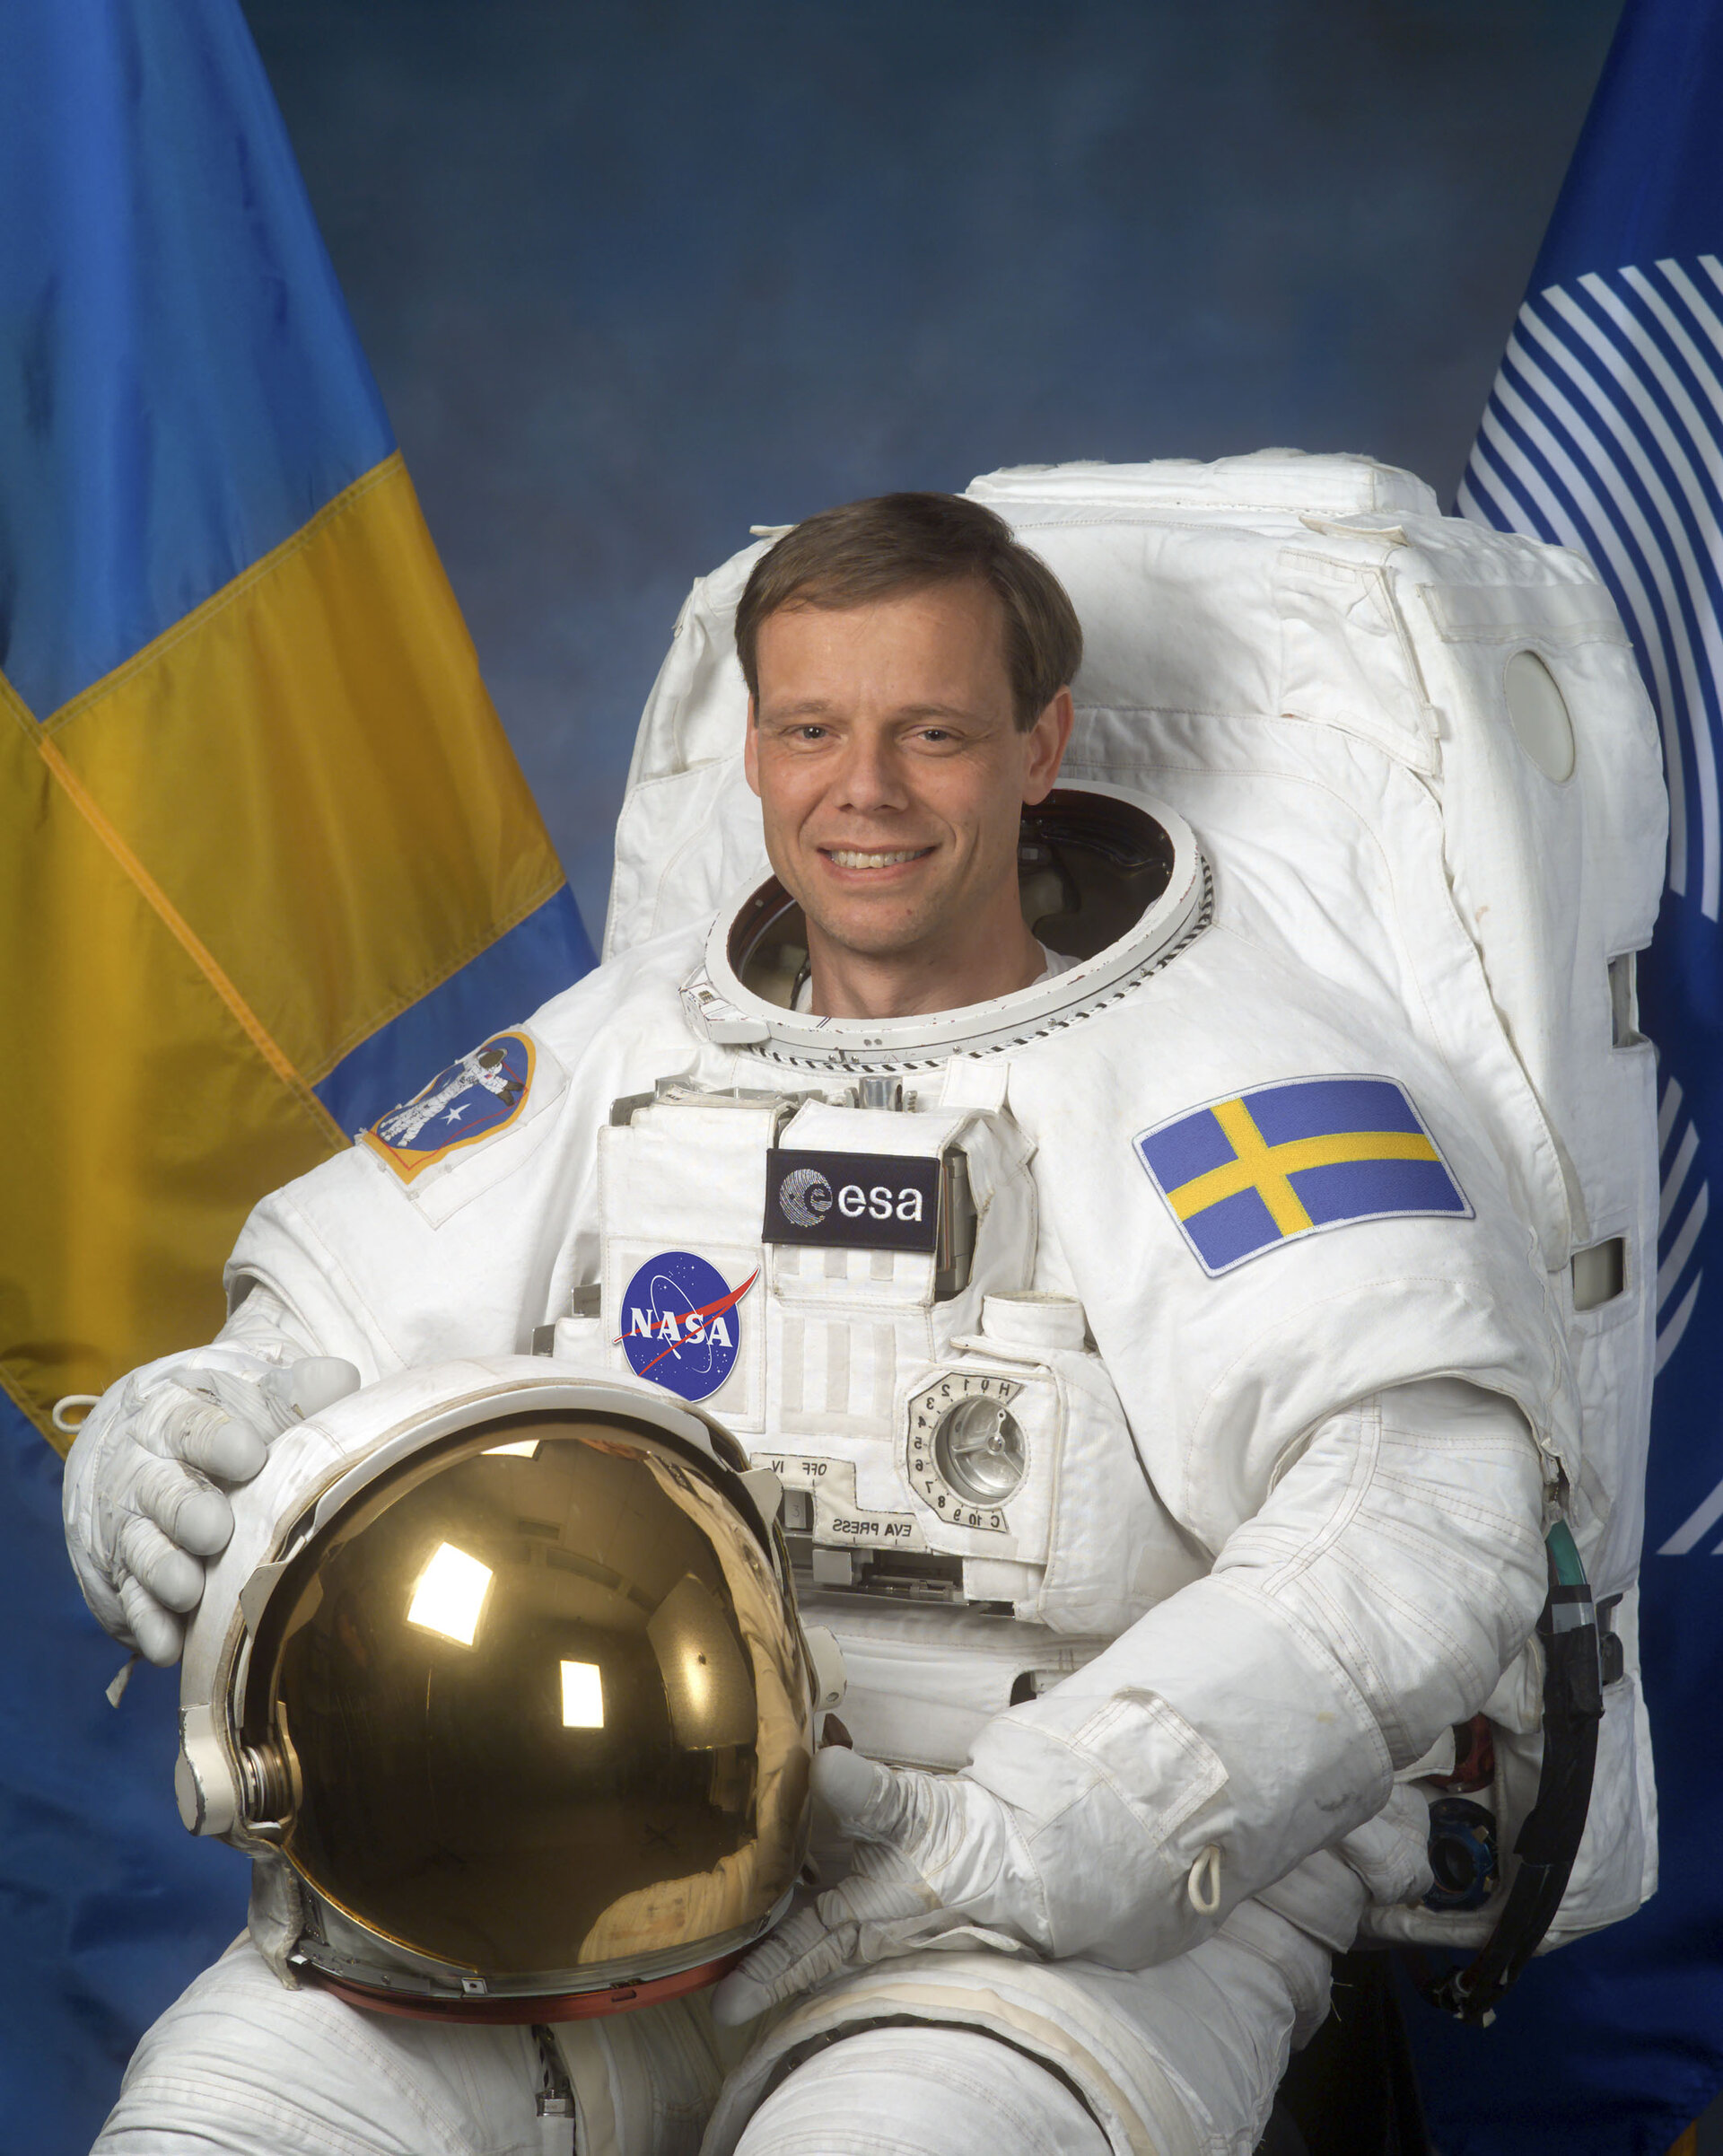 Christer Fuglesang is assigned as Mission Specialist for the STS-128 mission